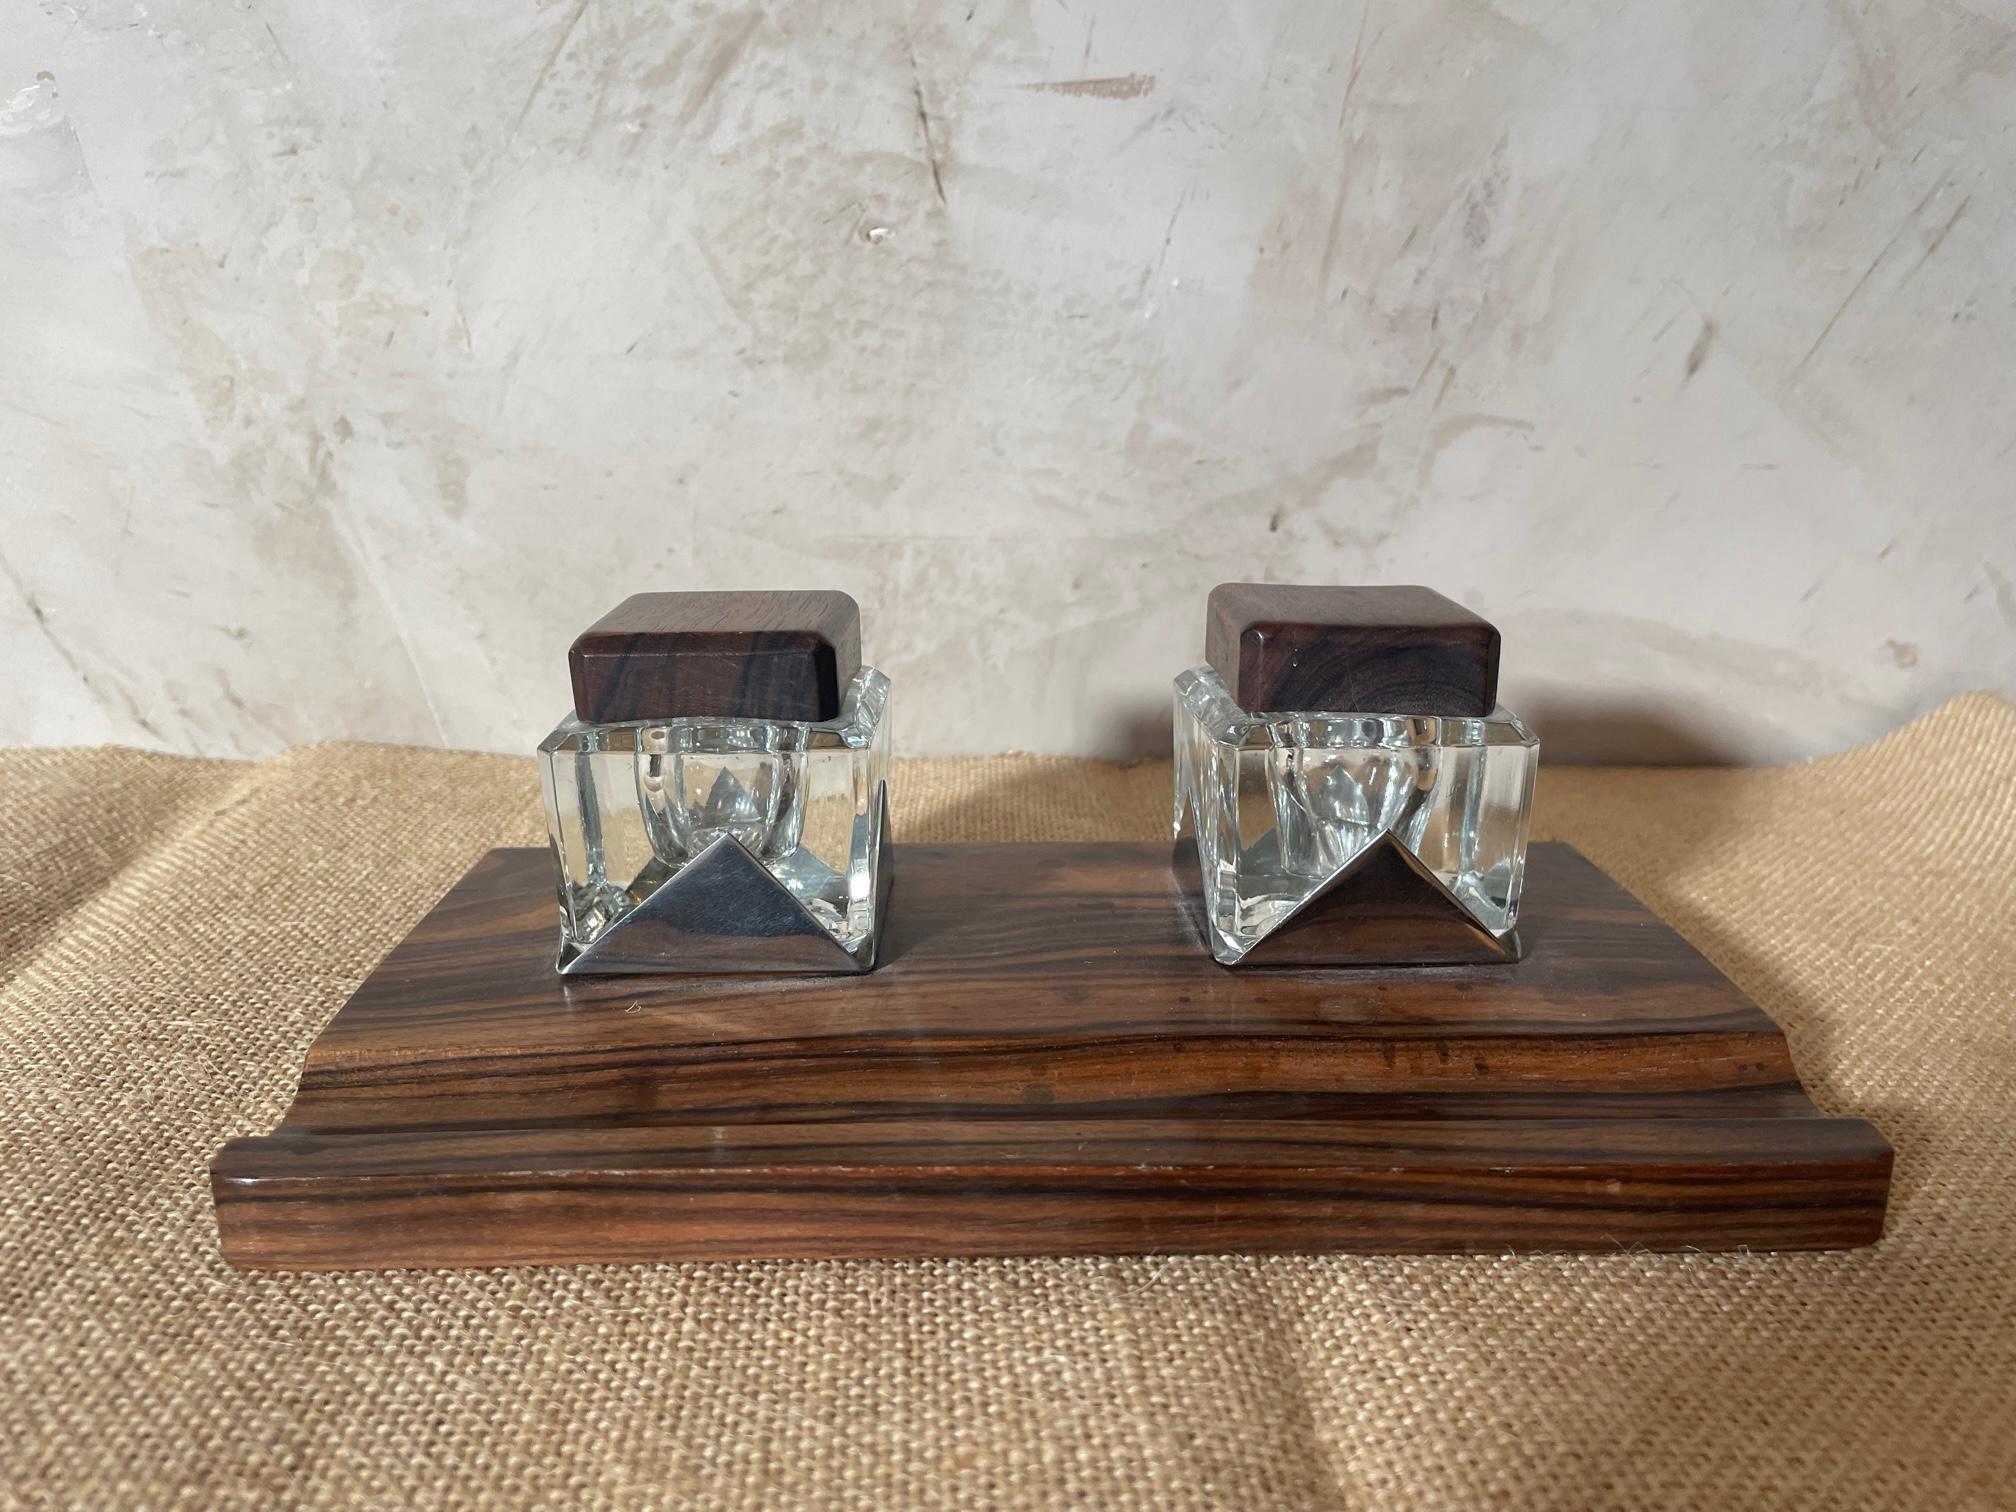 Inkwell in rosewood and glass from the 1950s in good condition. The two glass inkwells are removable and they have a rosewood lid.